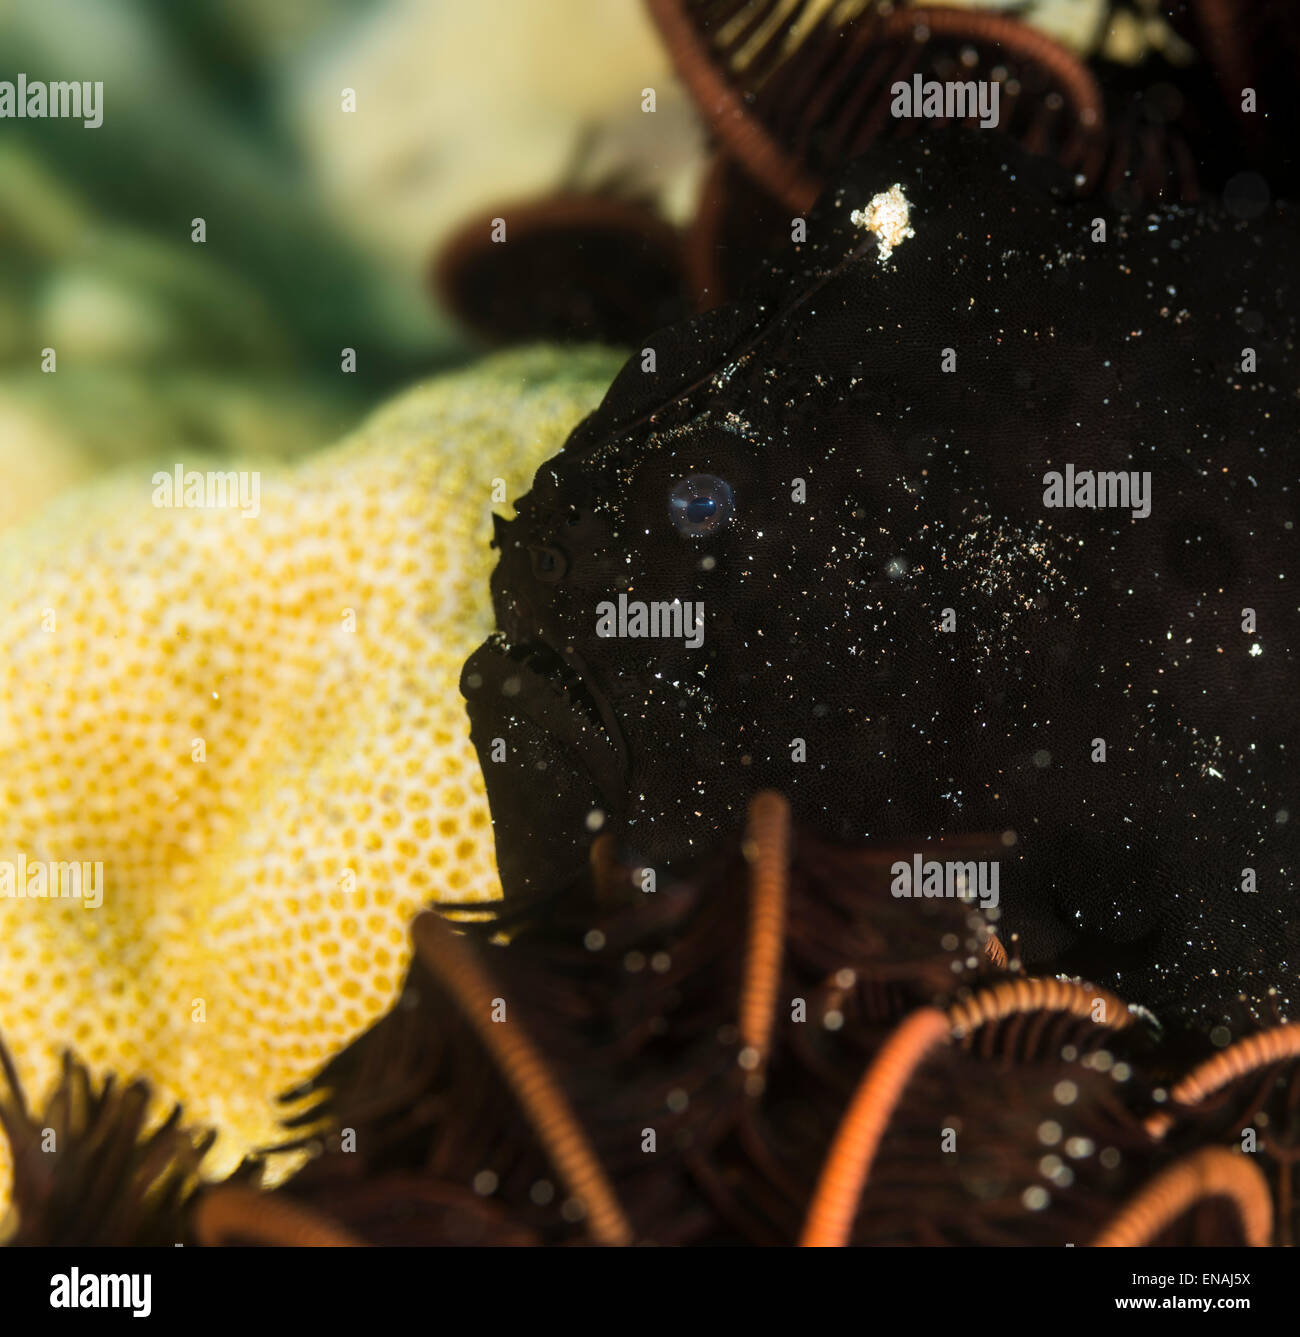 Black frogfish on a coral Stock Photo